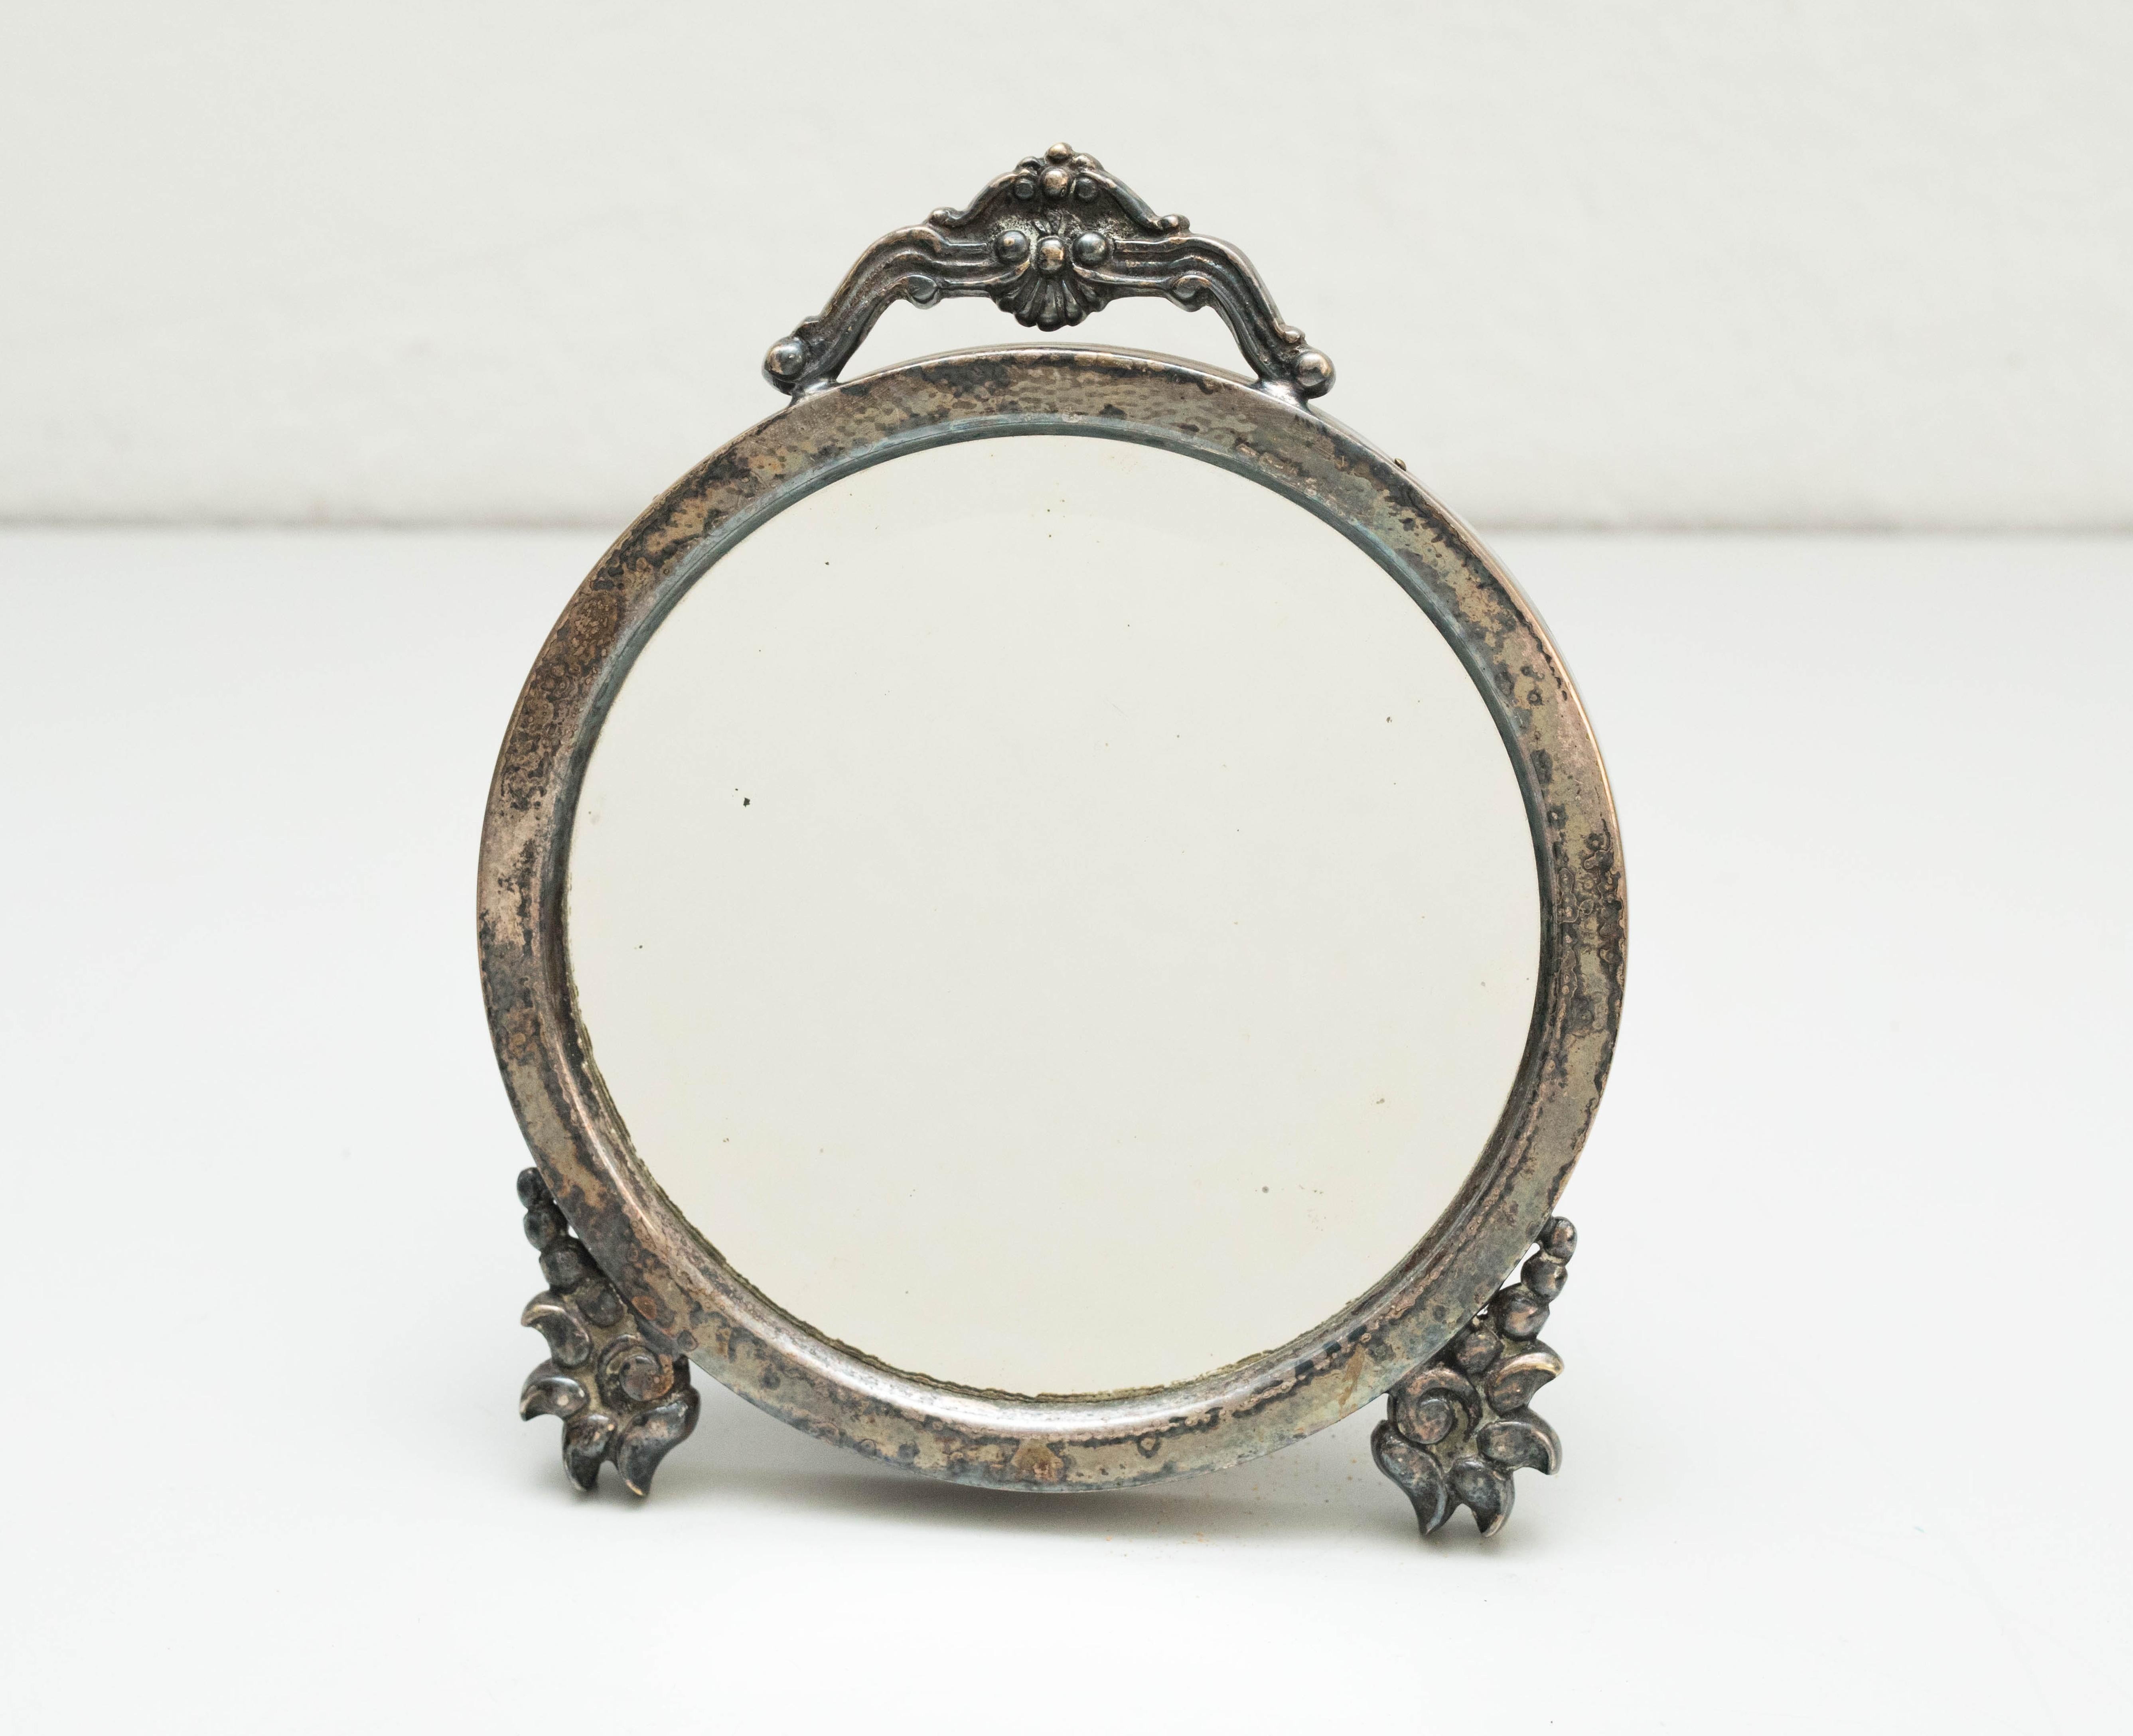 Metal and wood circular Mirror, circa 1930 
Traditionally manufactured in Spain.
By unknown designer.

In original condition with minor wear consistent of age and use, preserving a beautiful patina.

Material:
Metal and Wood

Dimensions:
H